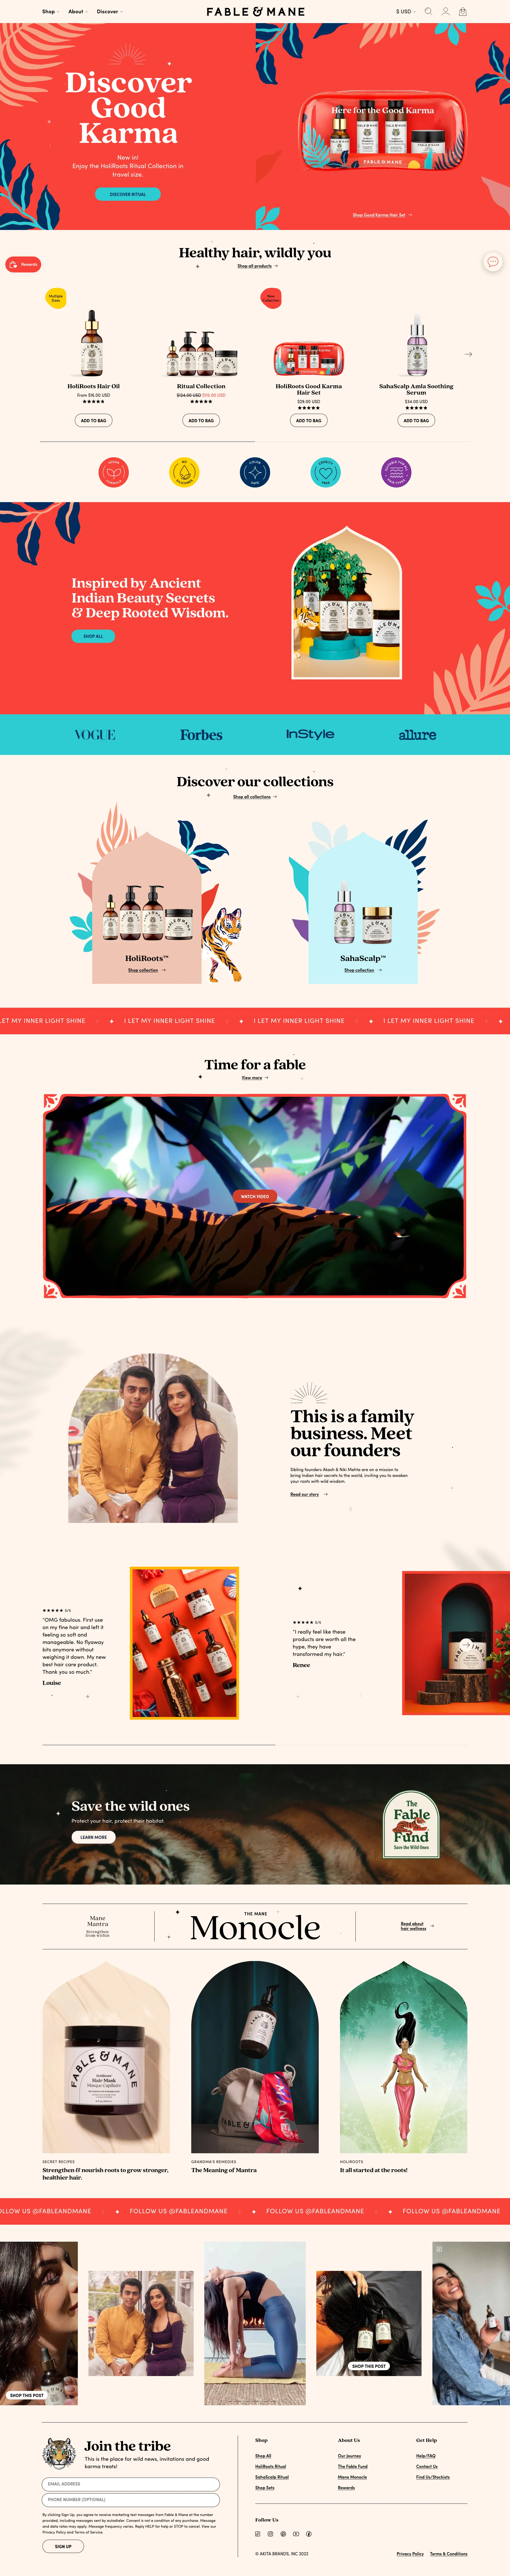 Fable & Mane Landing Page Example: A modern hair wellness brand of potent plant-based products inspired by ancient Indian beauty secrets with vegan, clean and cruelty-free formulas.